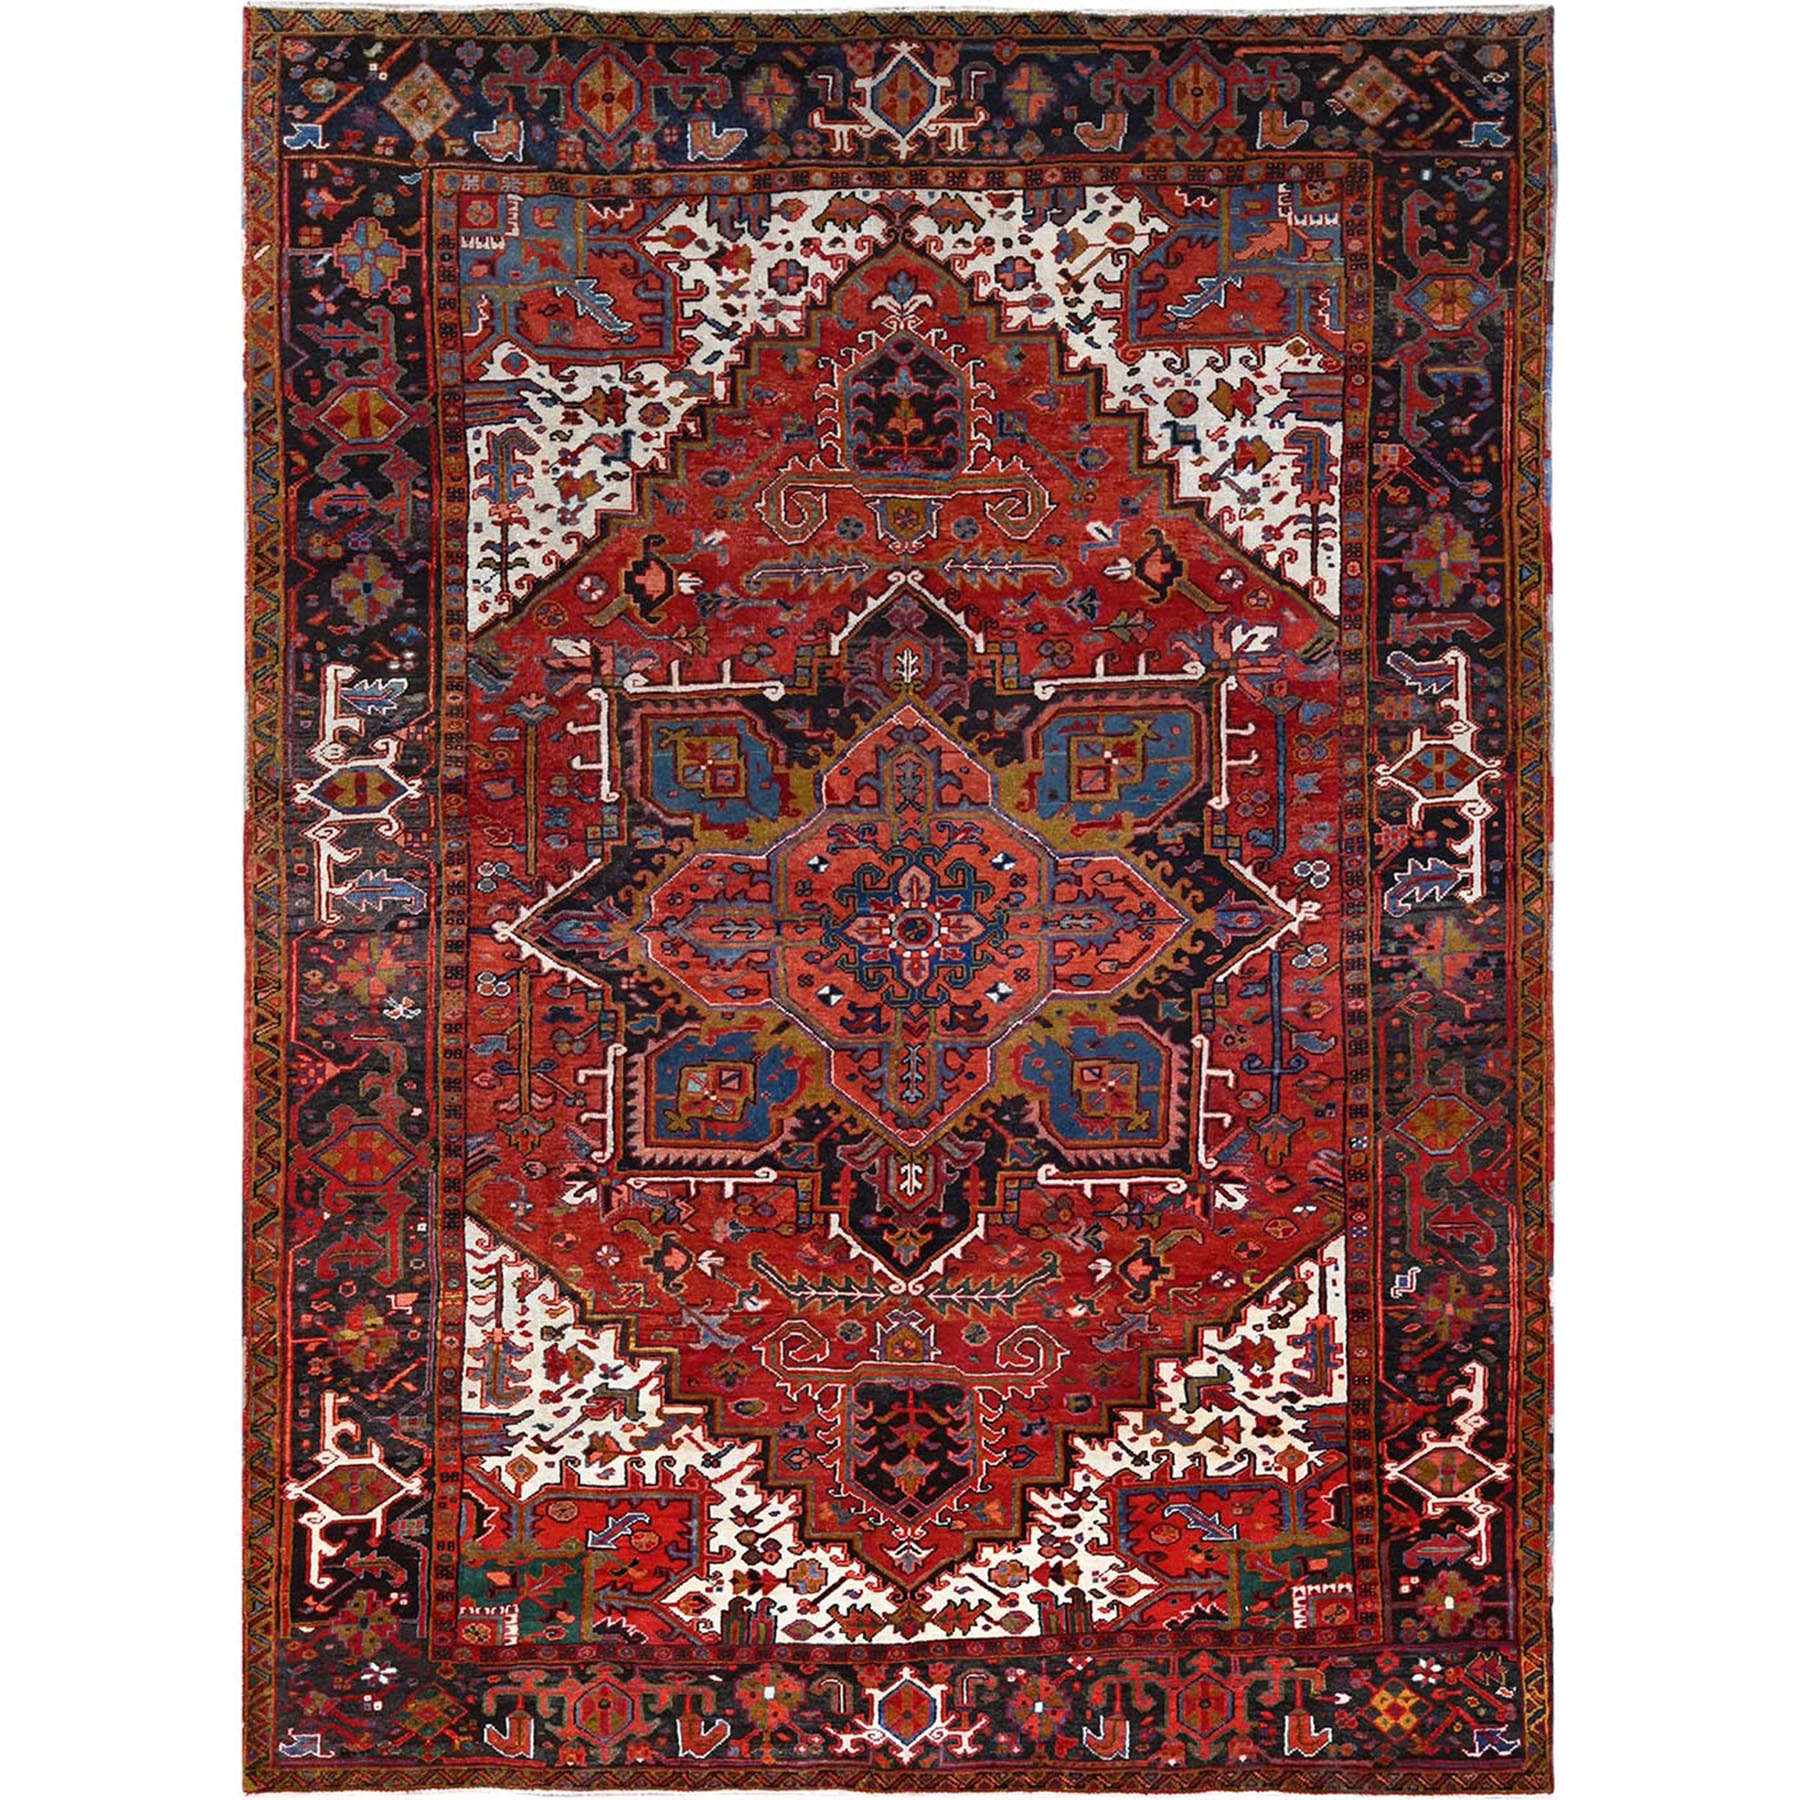 8'x10'8" Fire Brick Red, Rustic Look, Worn Wool, Hand Woven, Vintage Persian Heriz with Tribal Ambience, Good Condition, Oriental Rug 